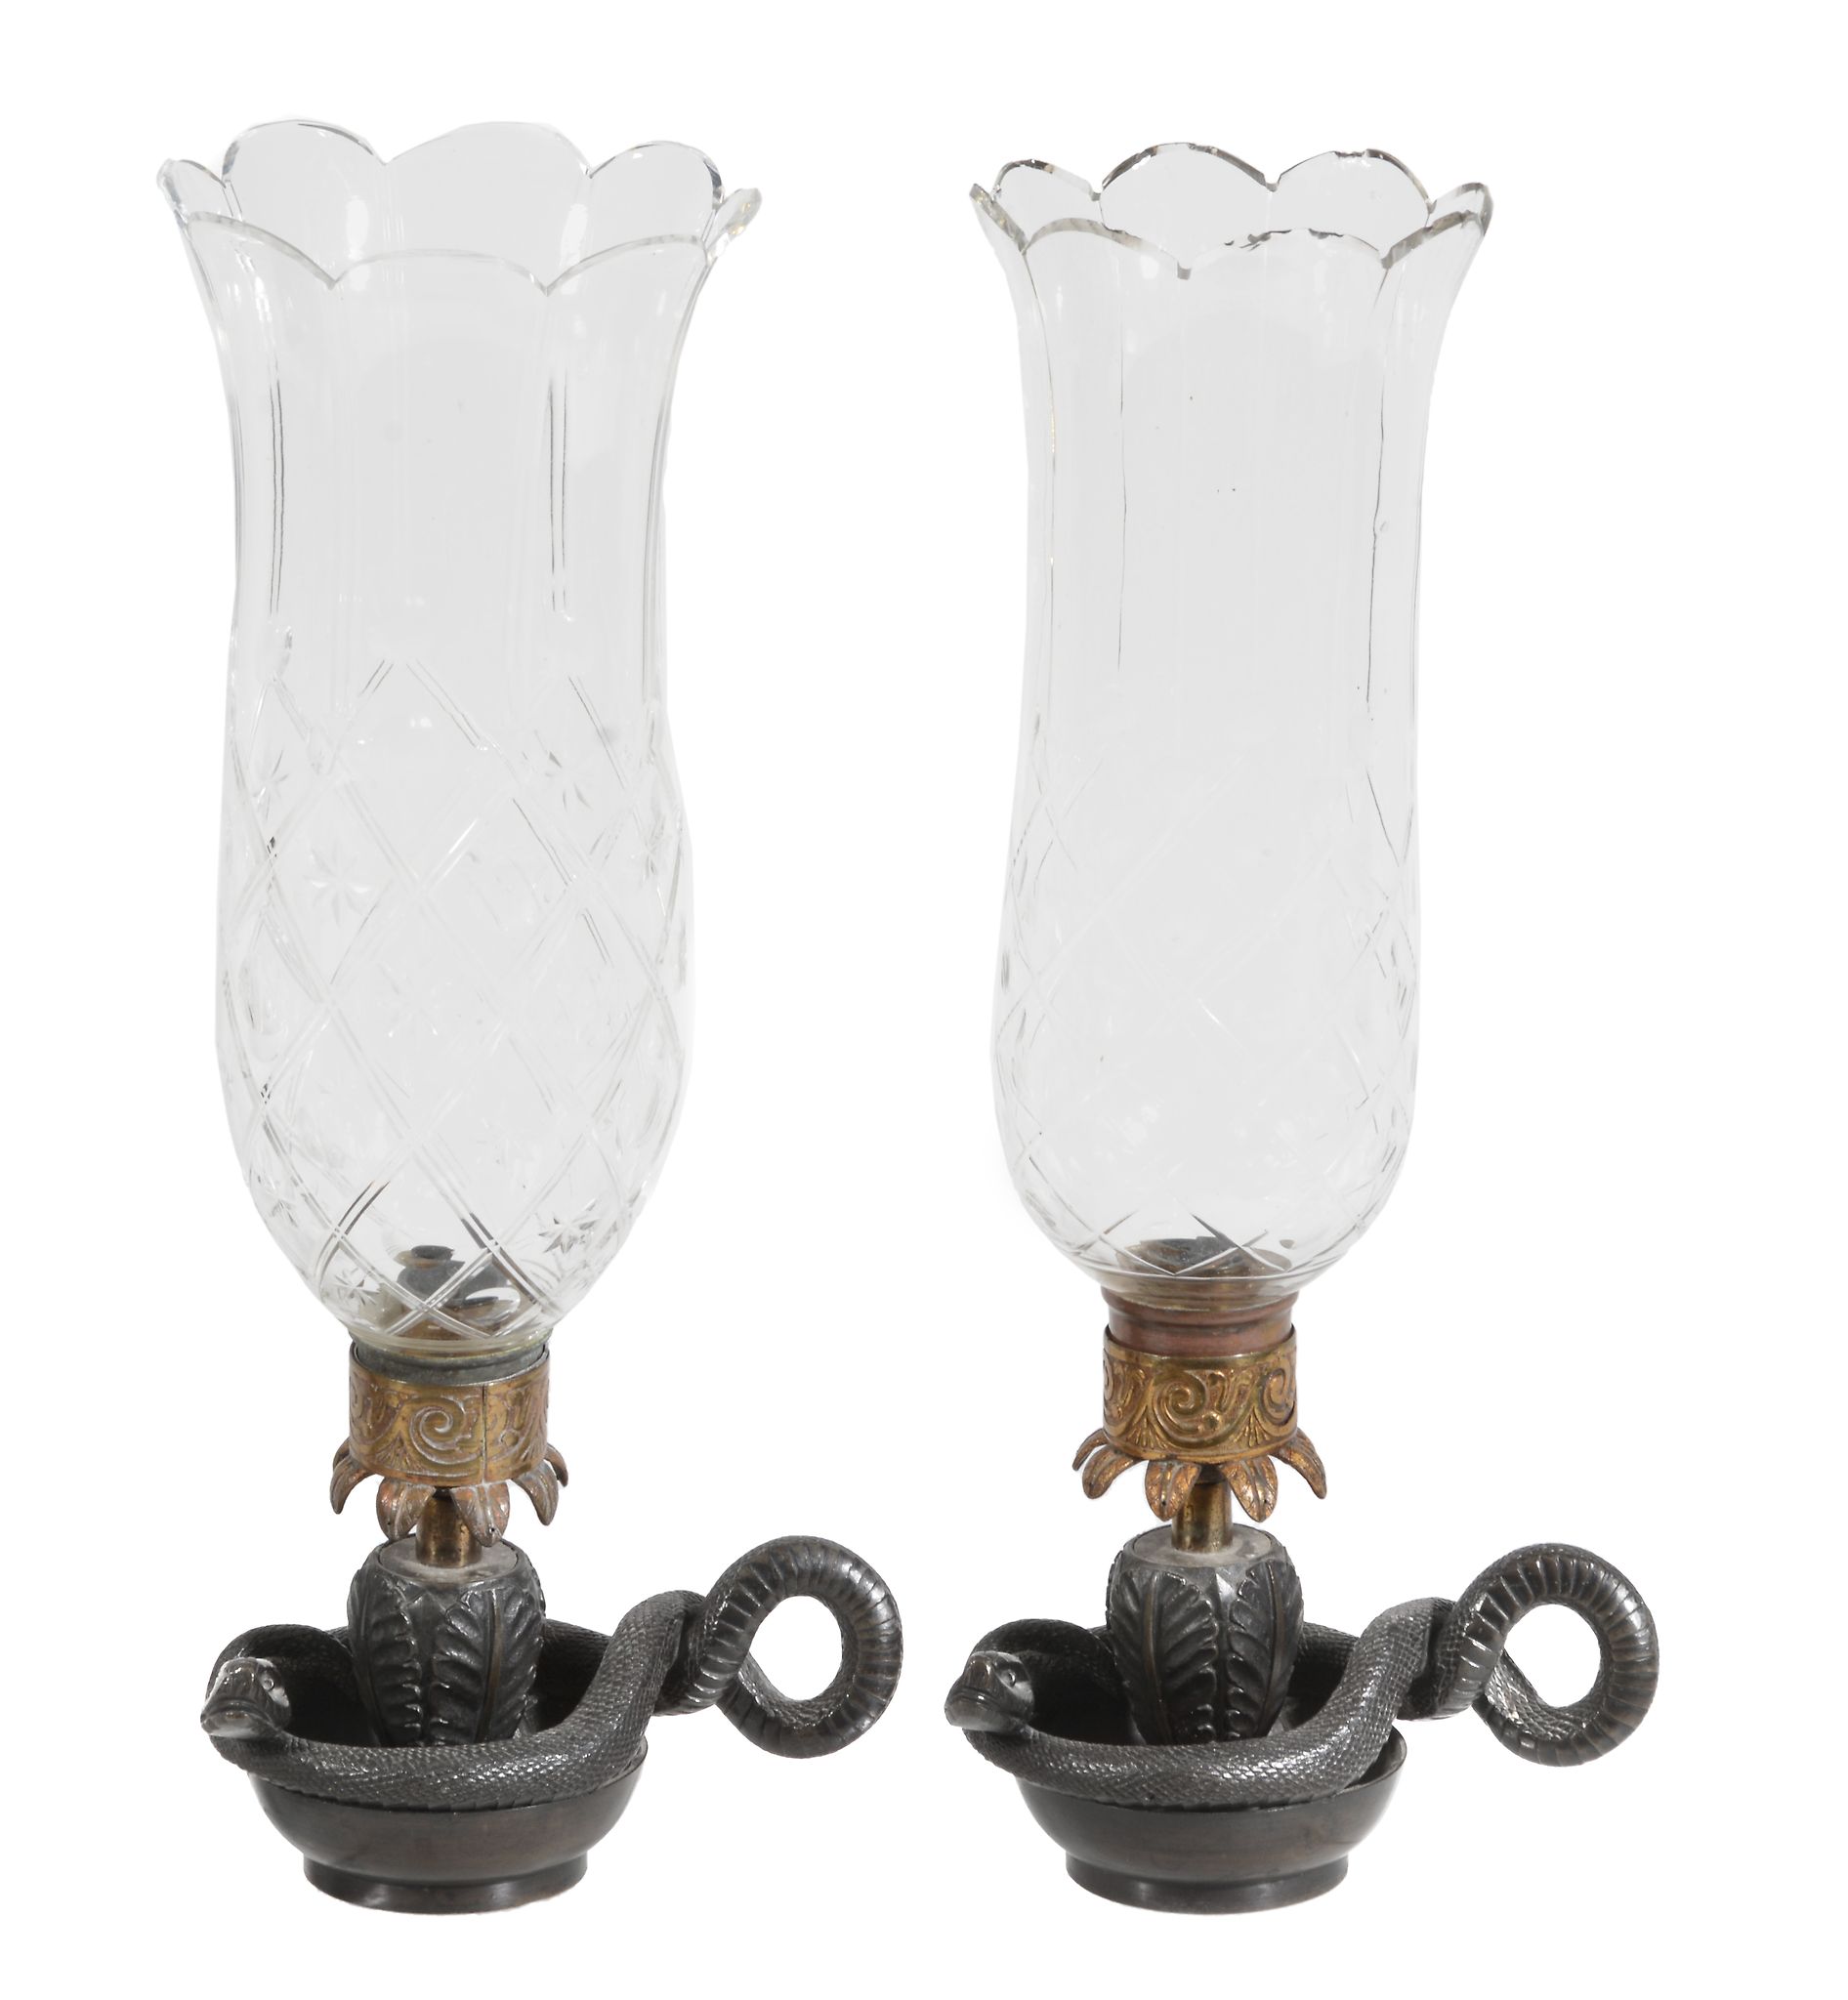 A pair of bronze and ormolu hurricane lamps  , first half 19th century, the glass chimneys above